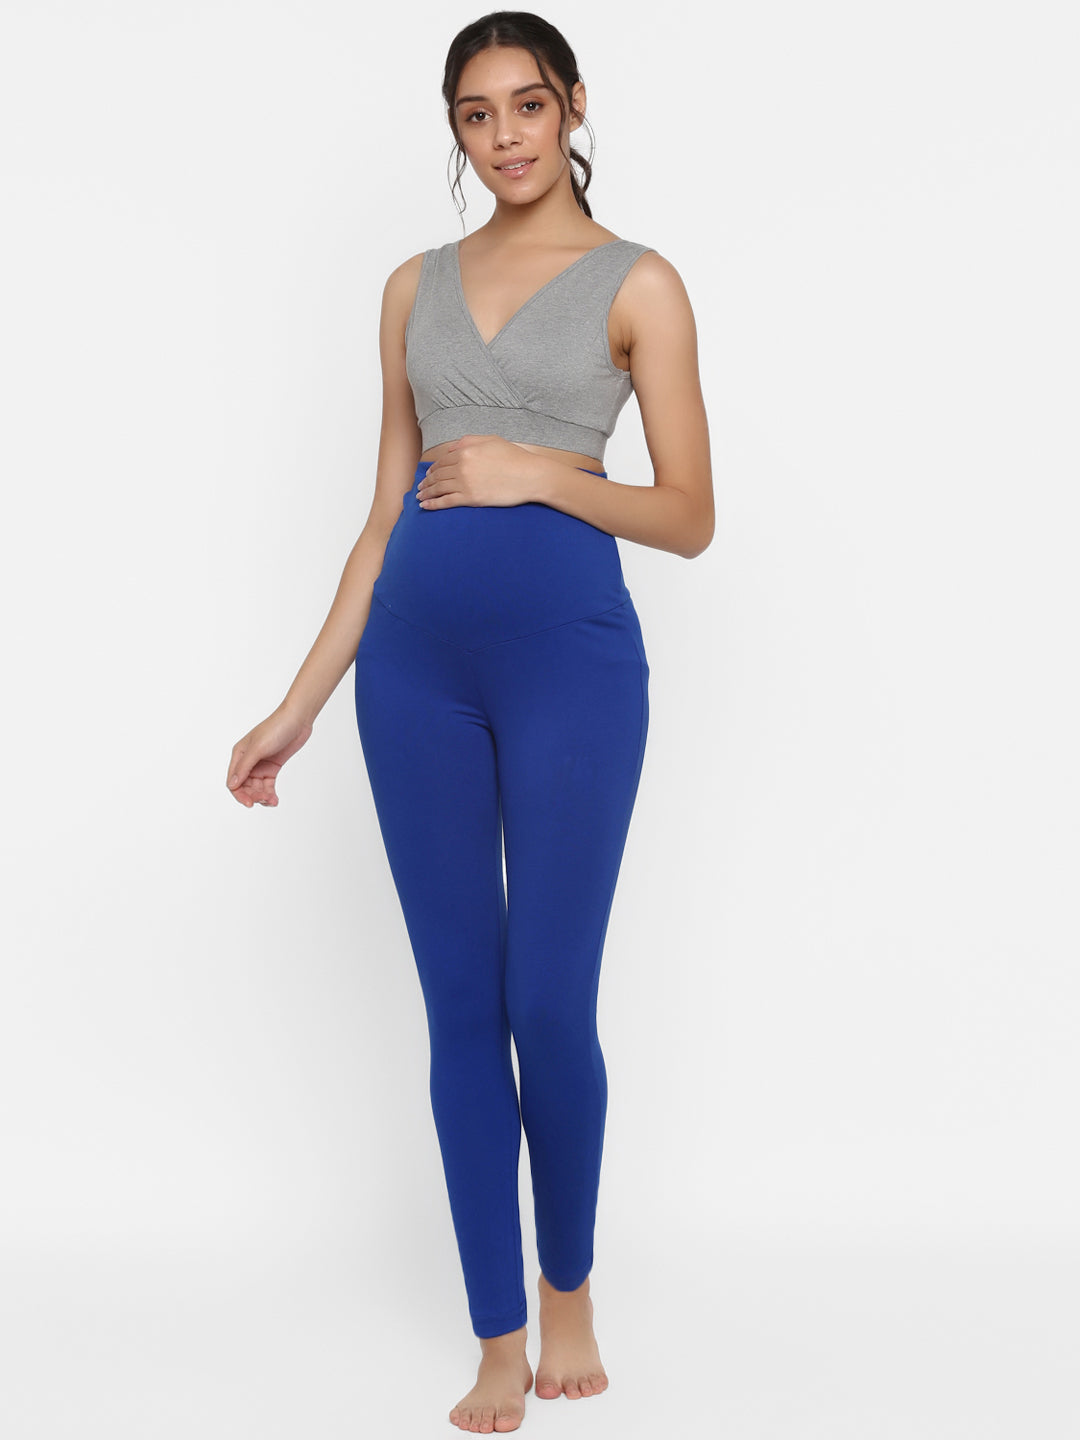 ELECTRIC BLUE TIGHTS | Sweat Sisters & Co.